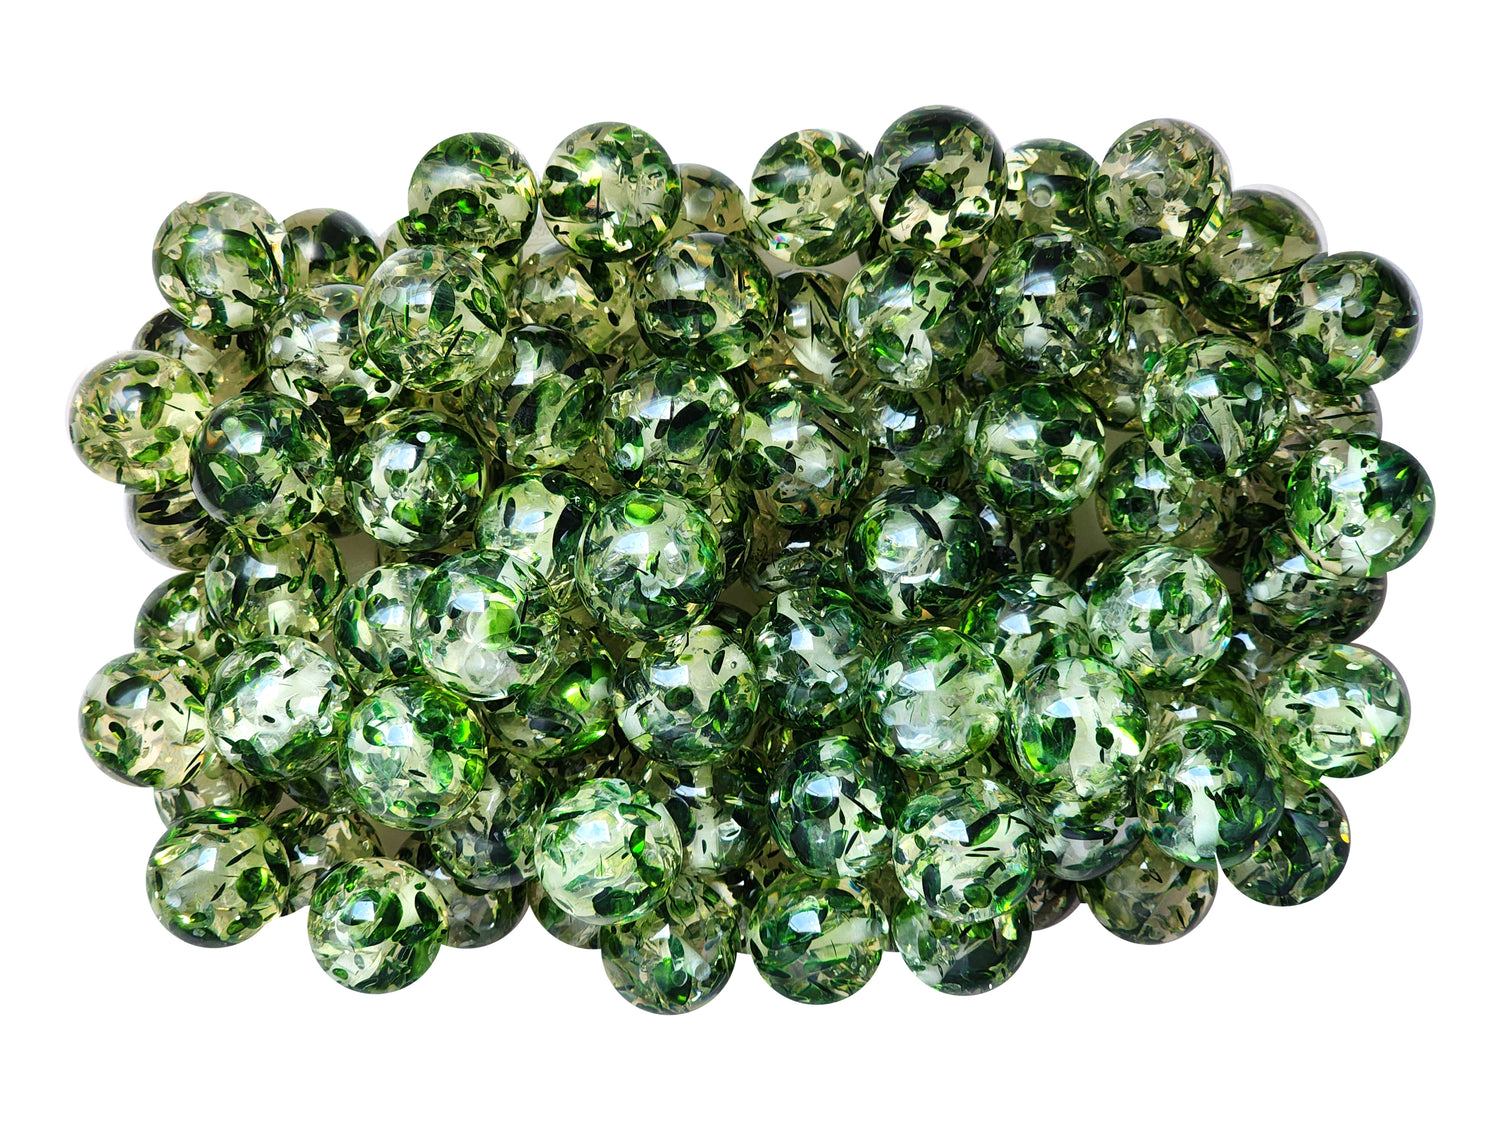 green stained glass 20mm wholesale bubblegum beads